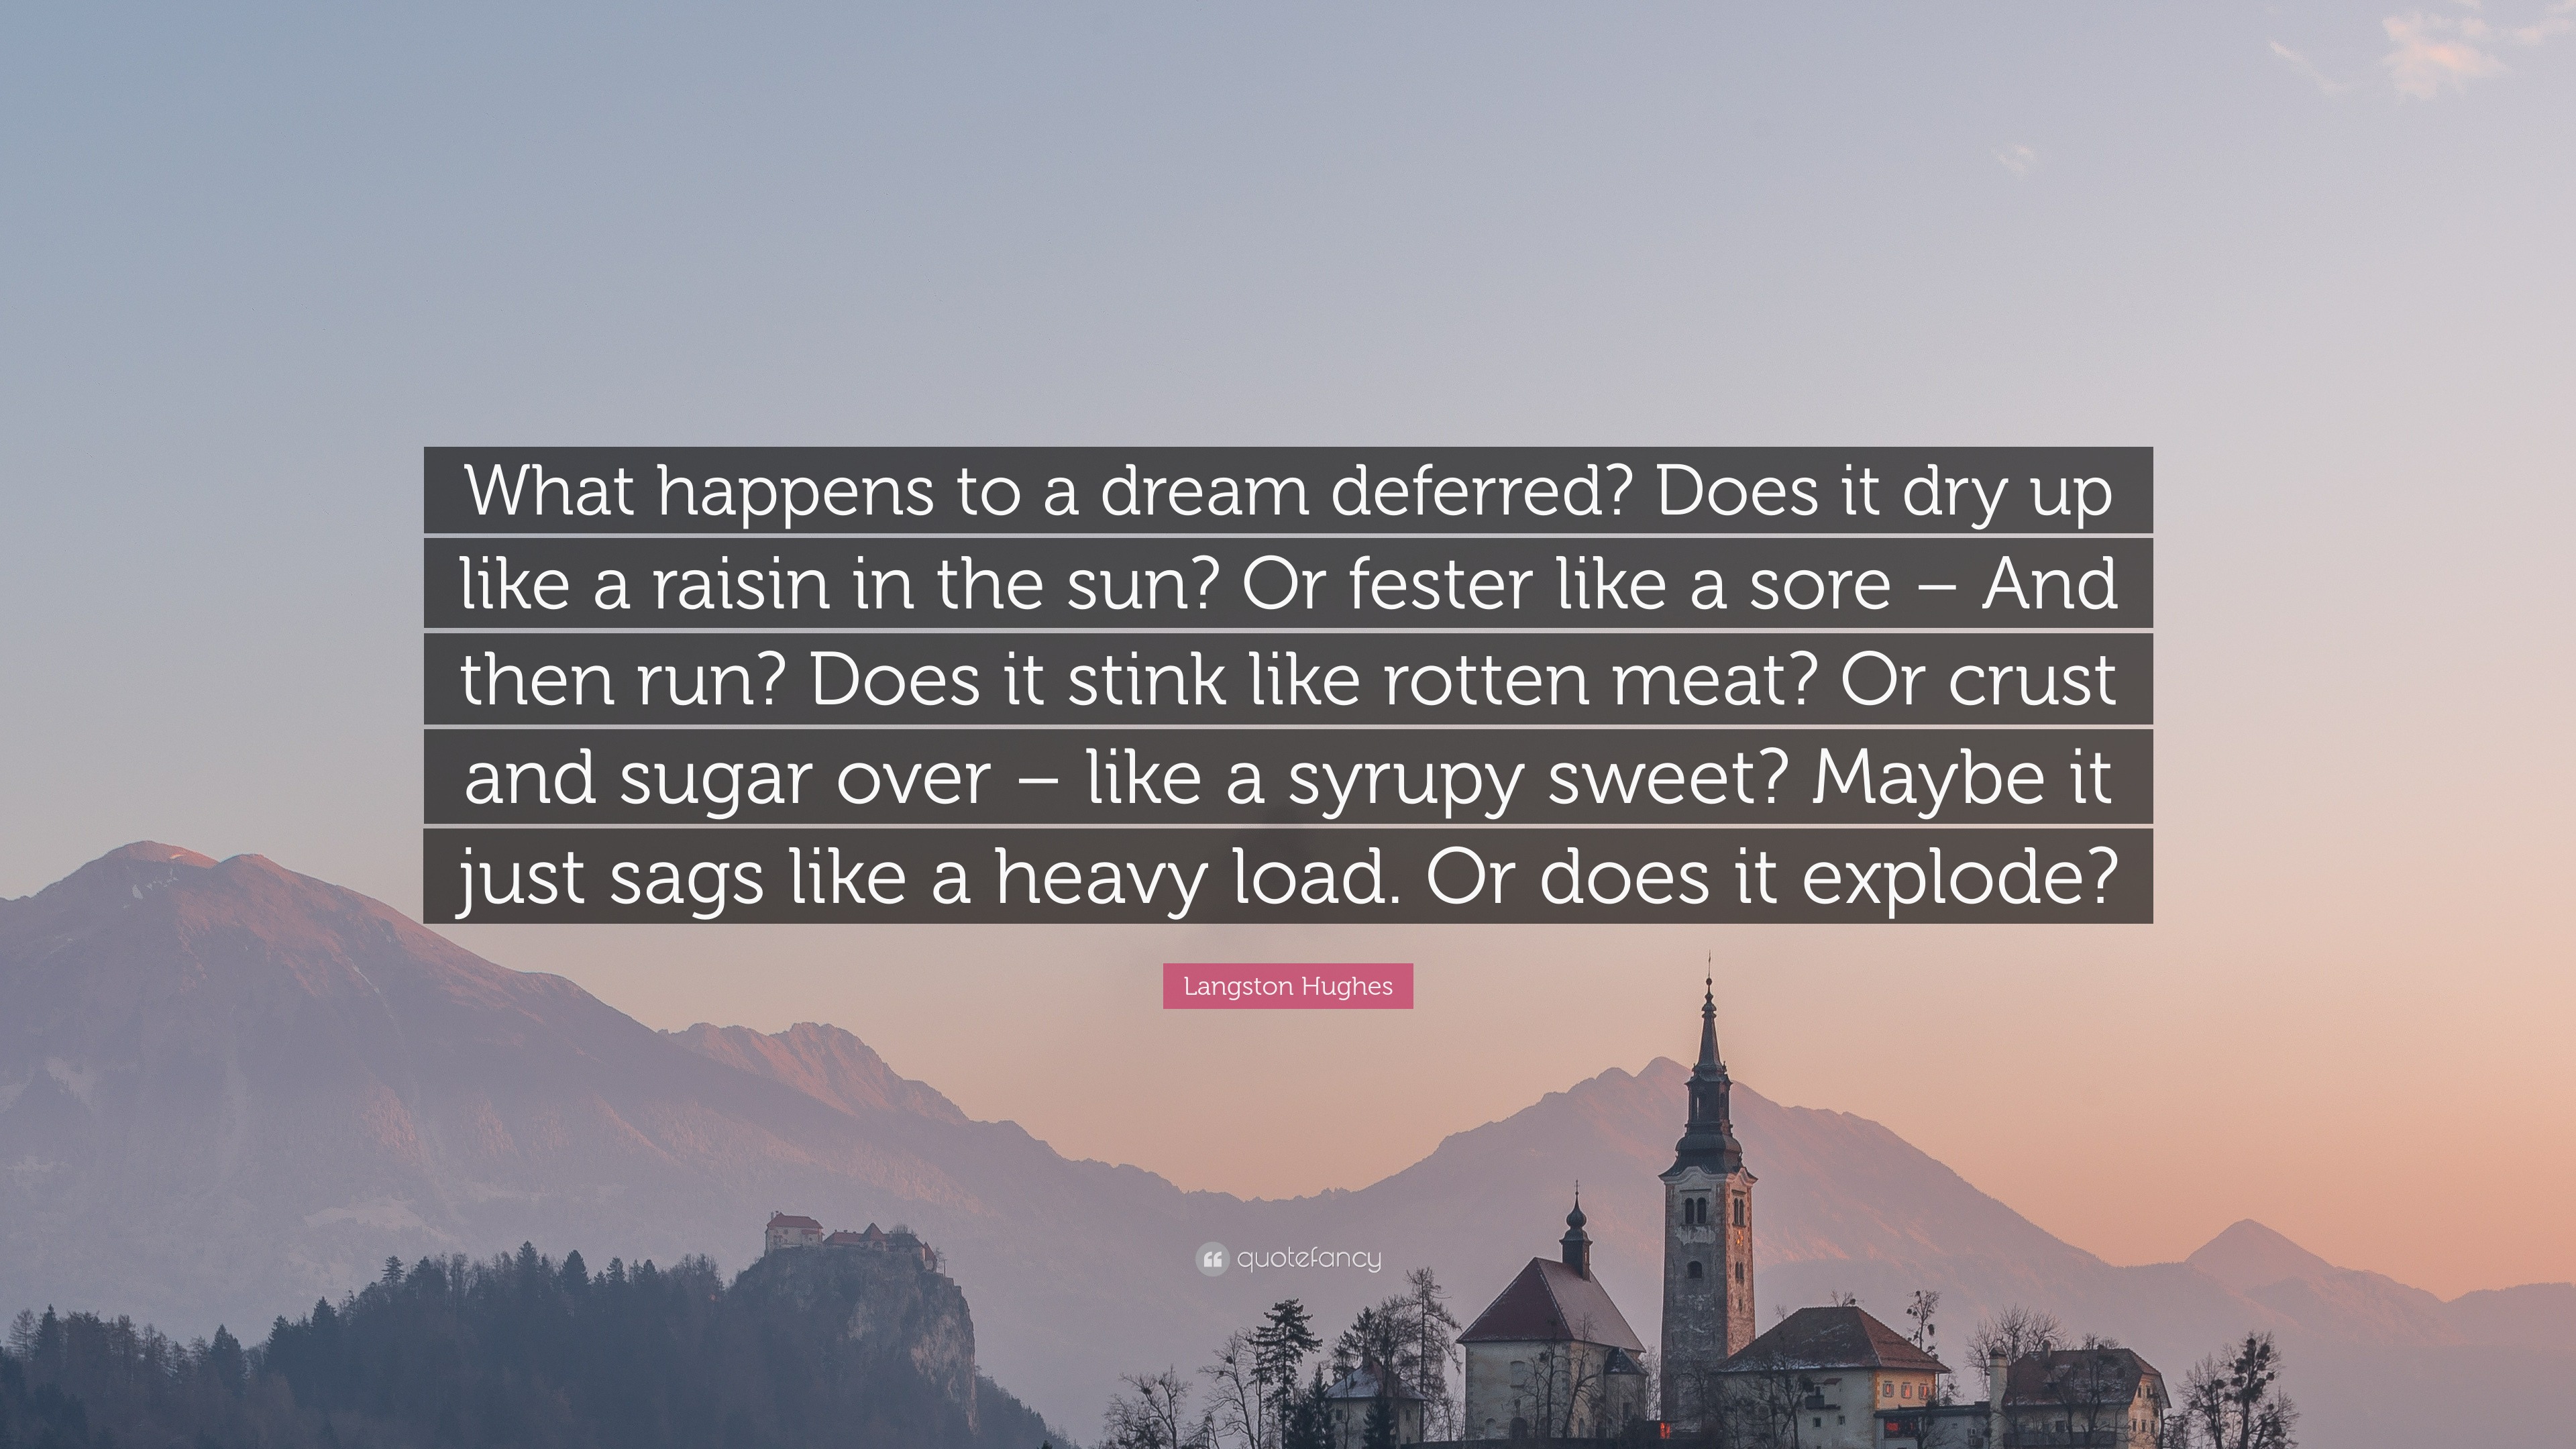 Langston Hughes Quote “What happens to a dream deferred? Does it dry